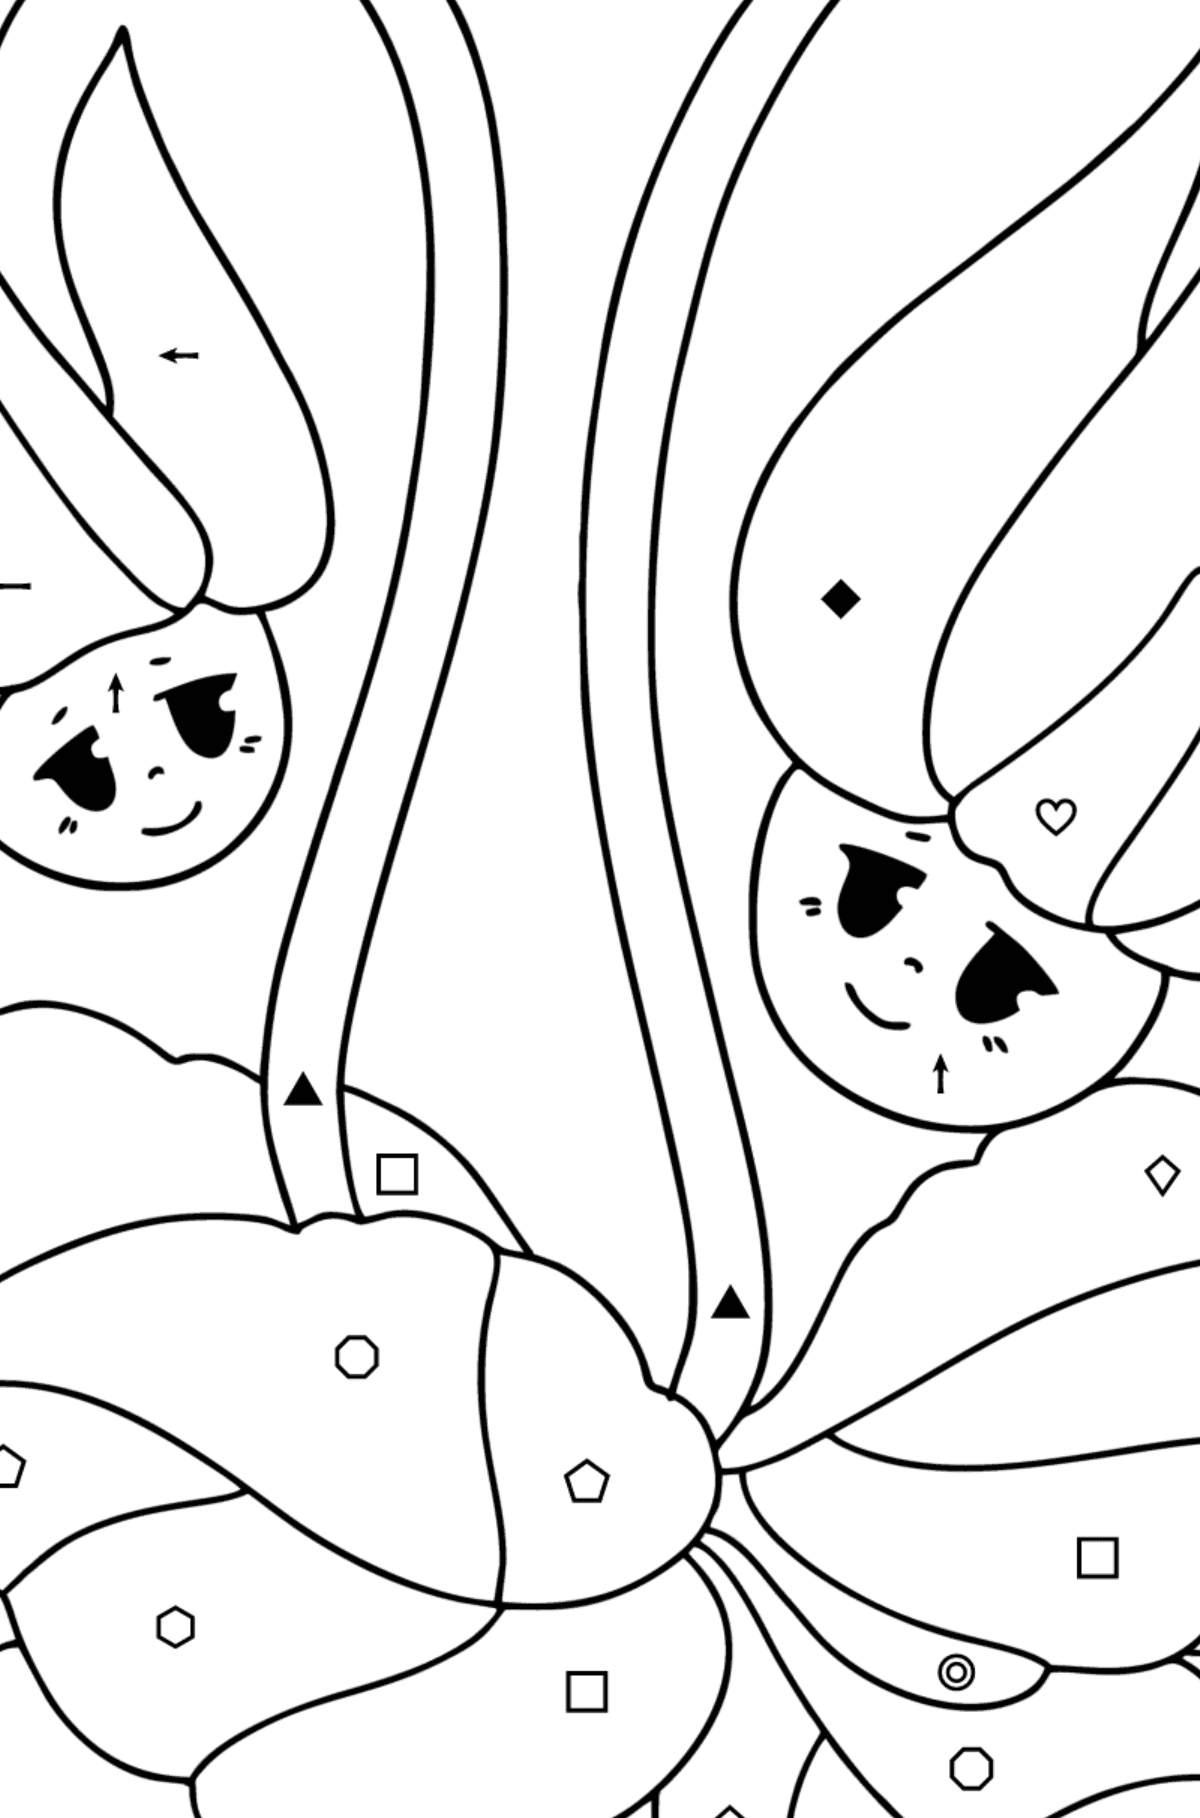 Cyclamen with eyes coloring page - Coloring by Symbols and Geometric Shapes for Kids